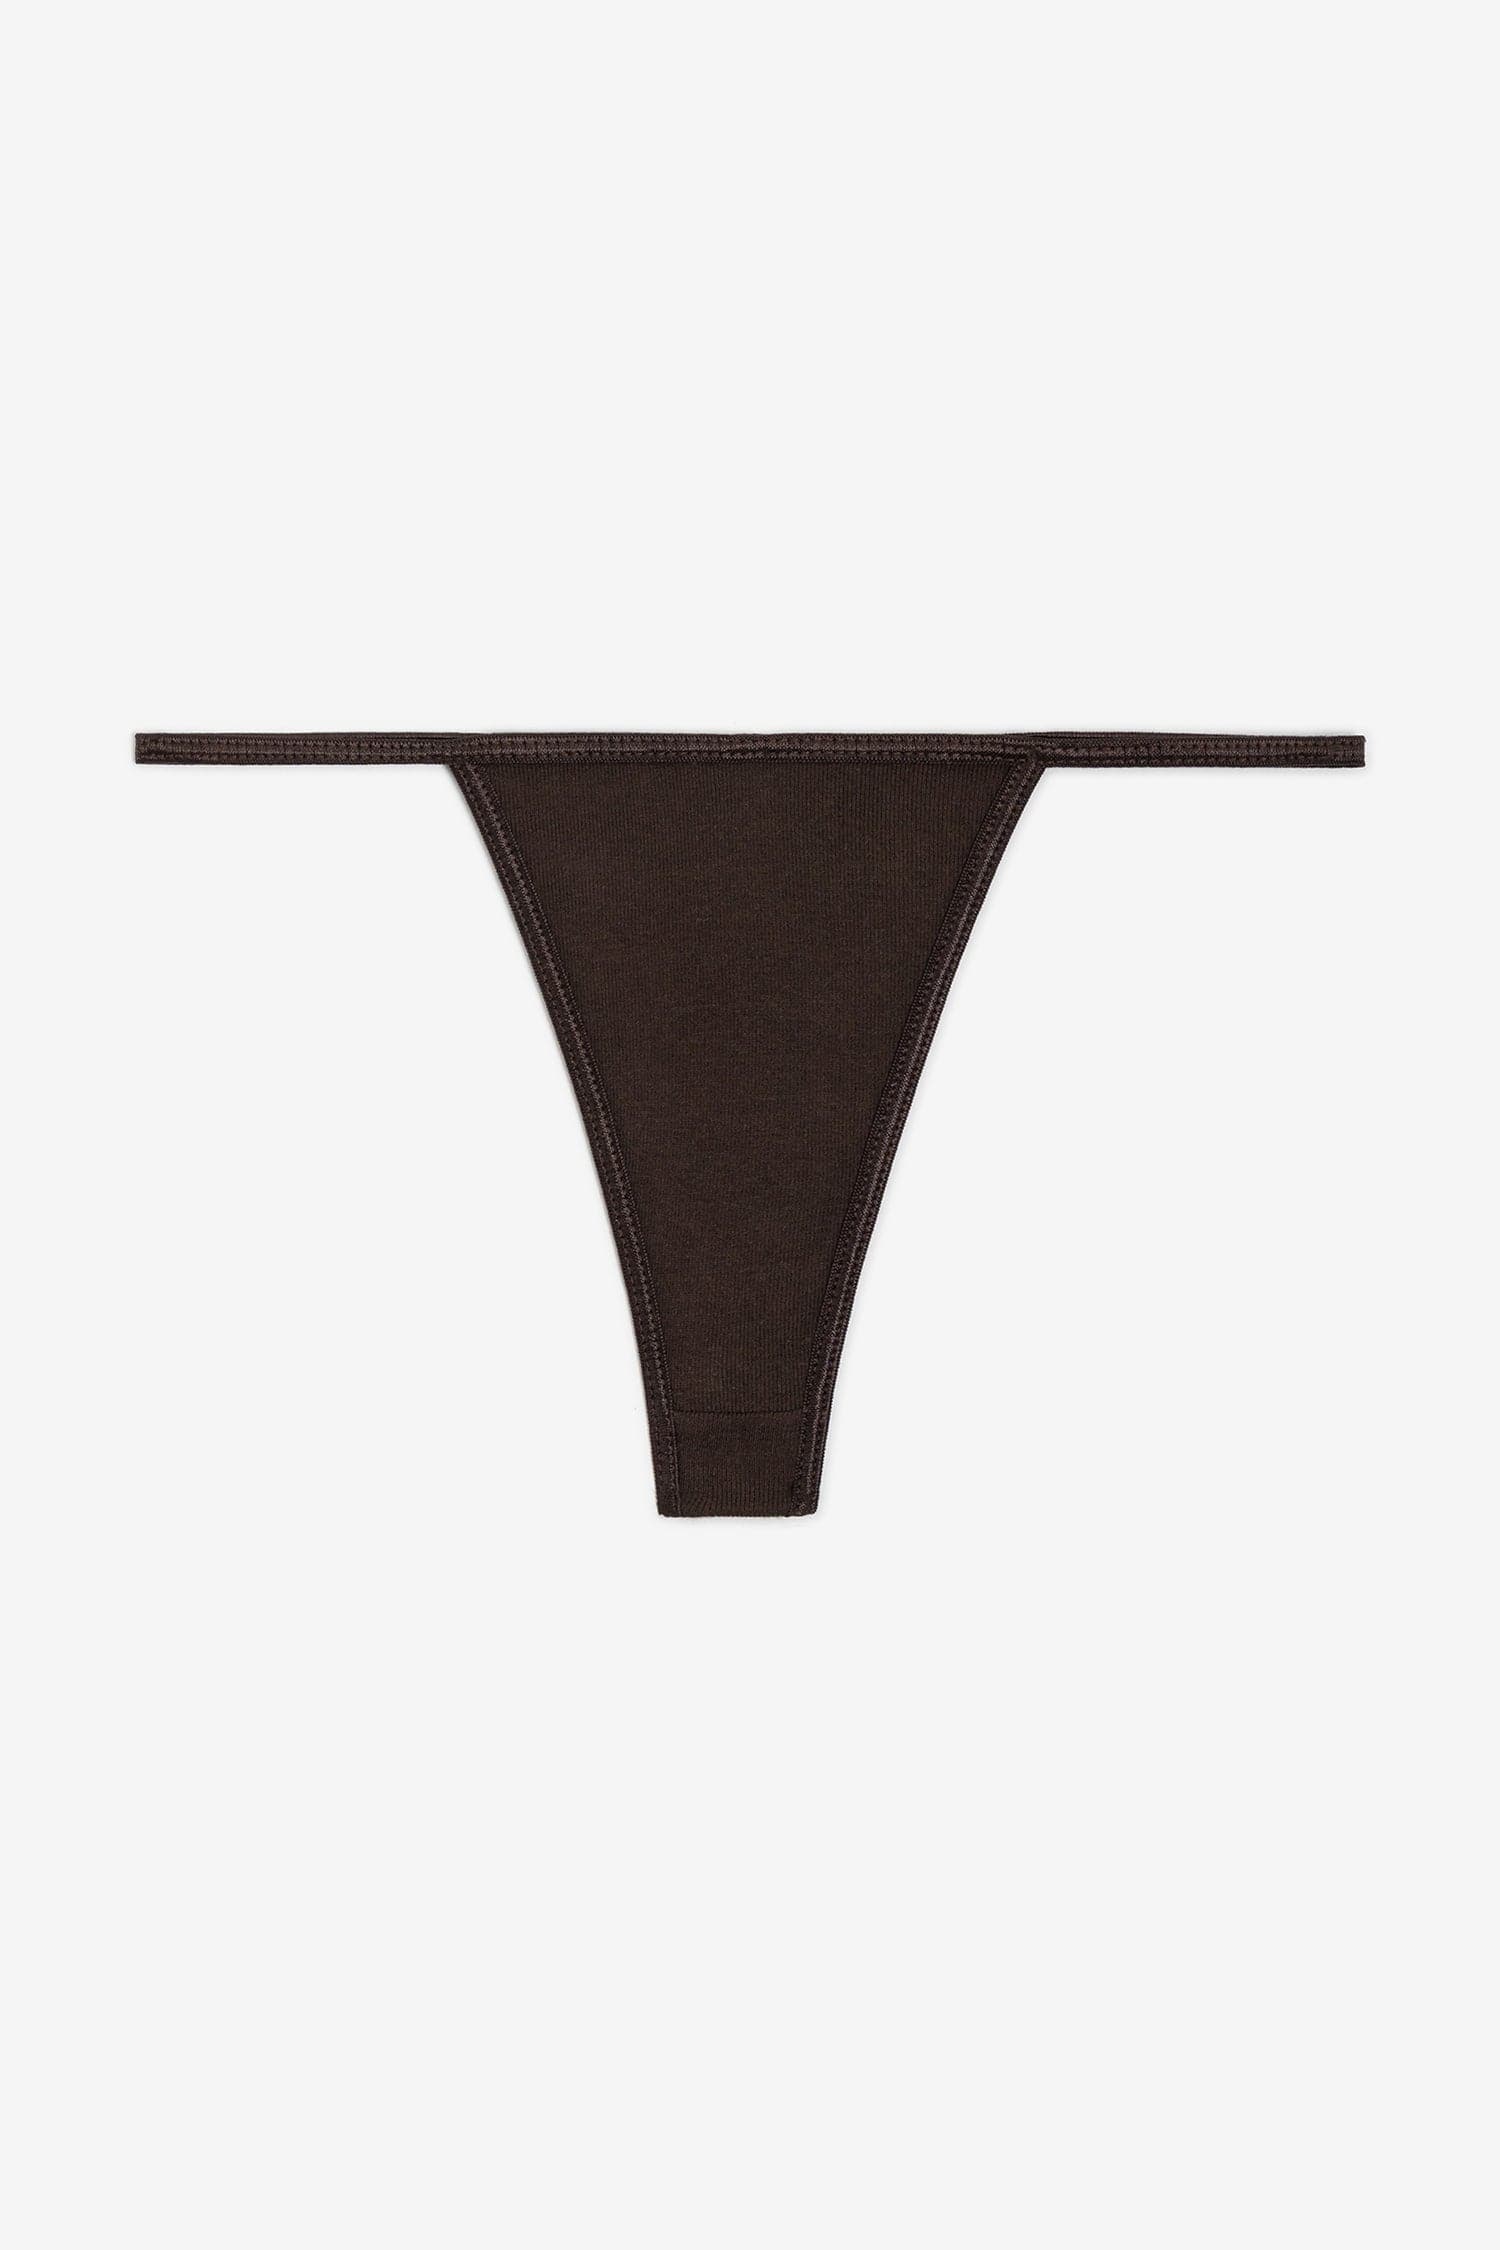 Super Low Rise Thong -  Canada